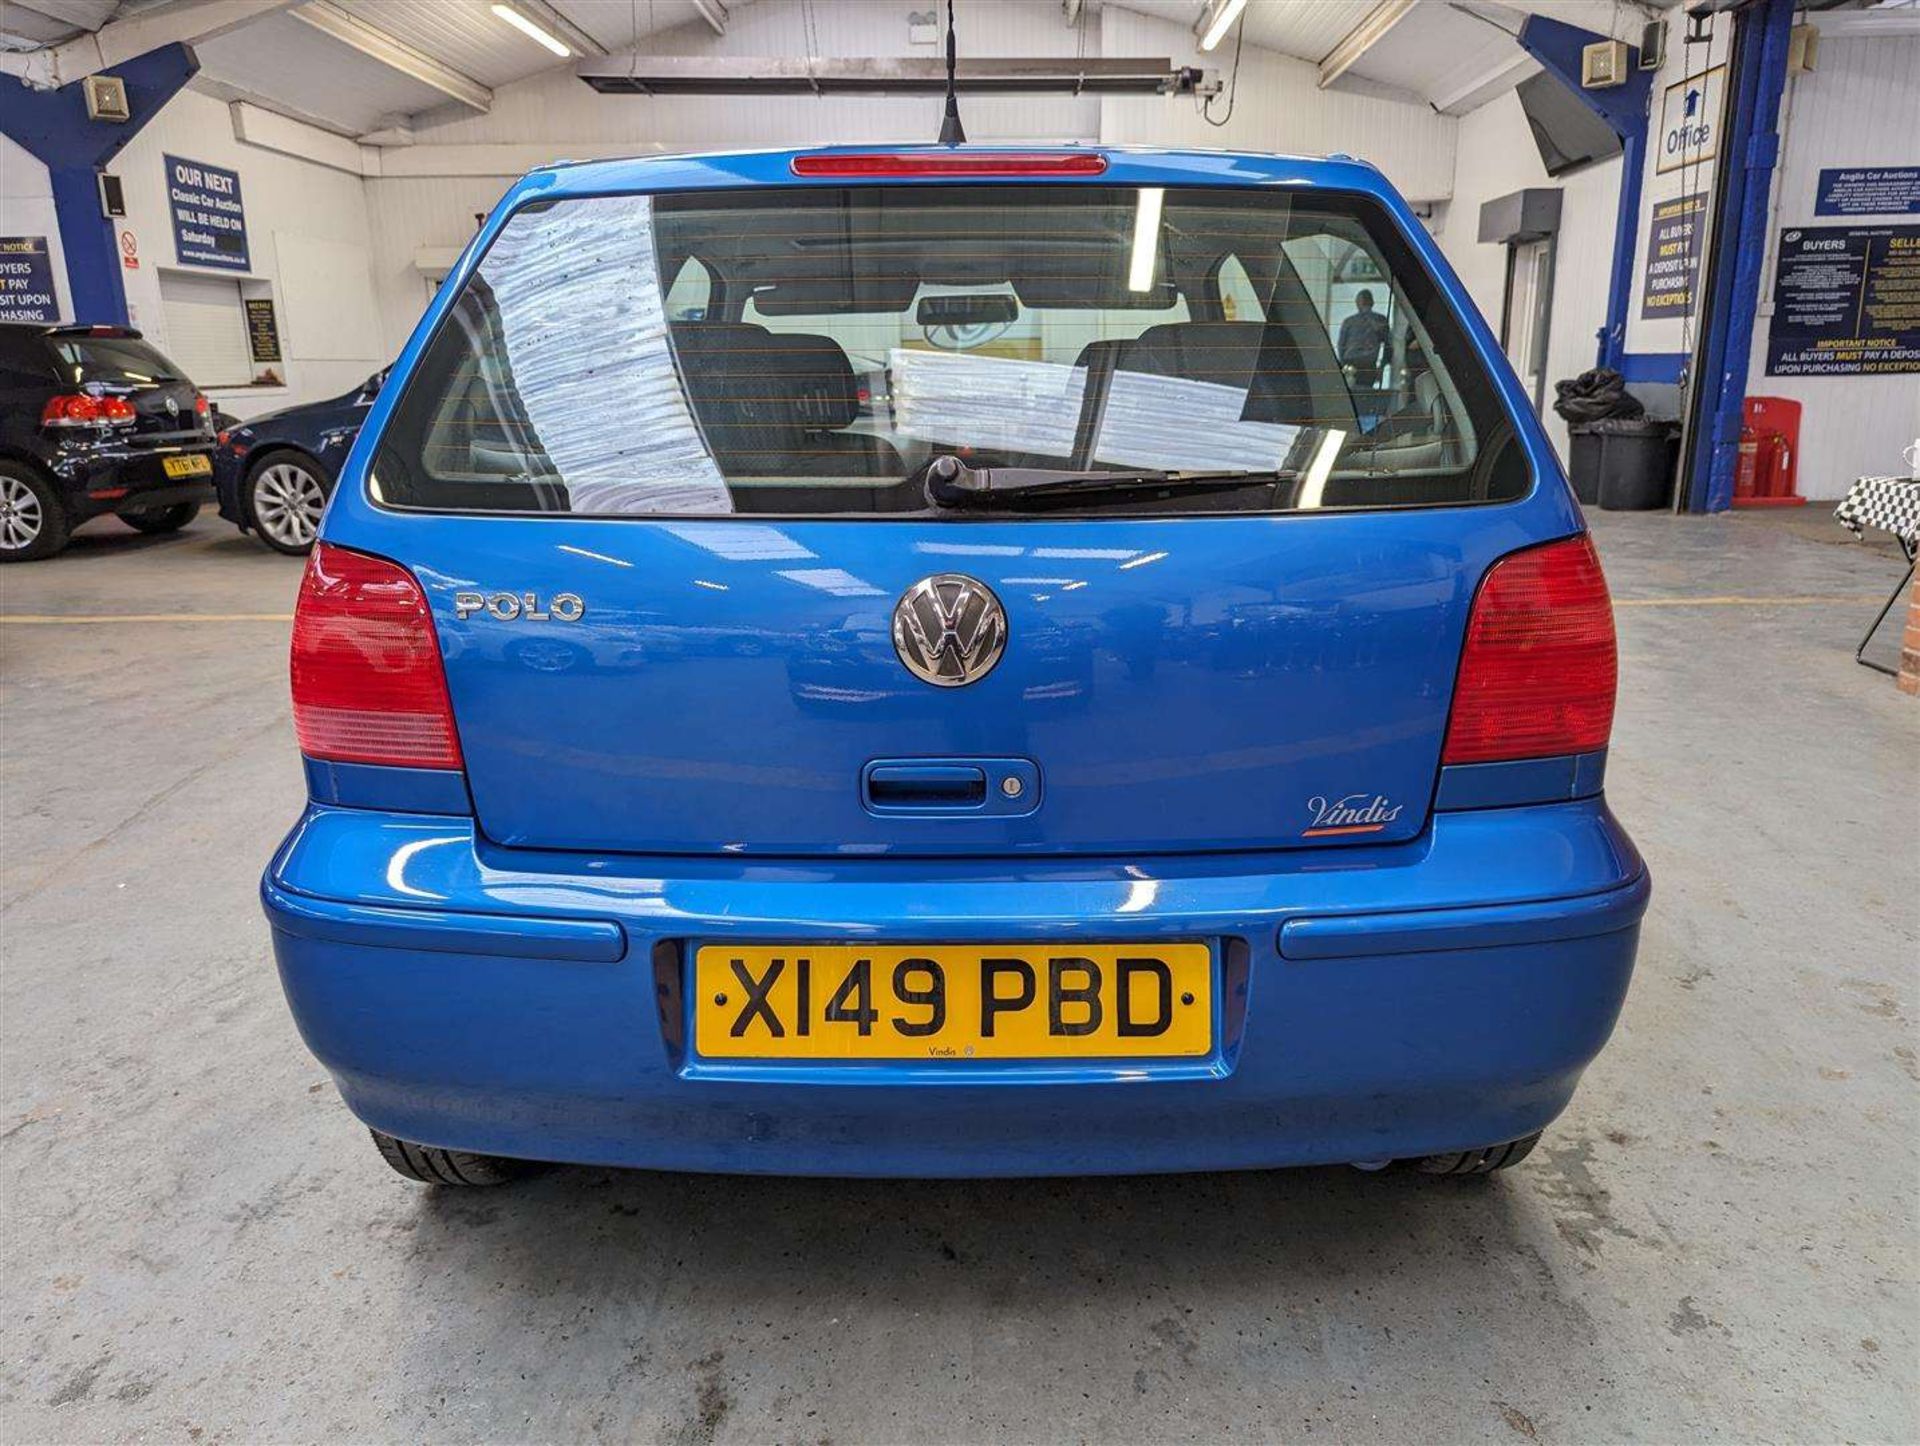 2001 VOLKSWAGEN POLO MATCH - Image 5 of 24